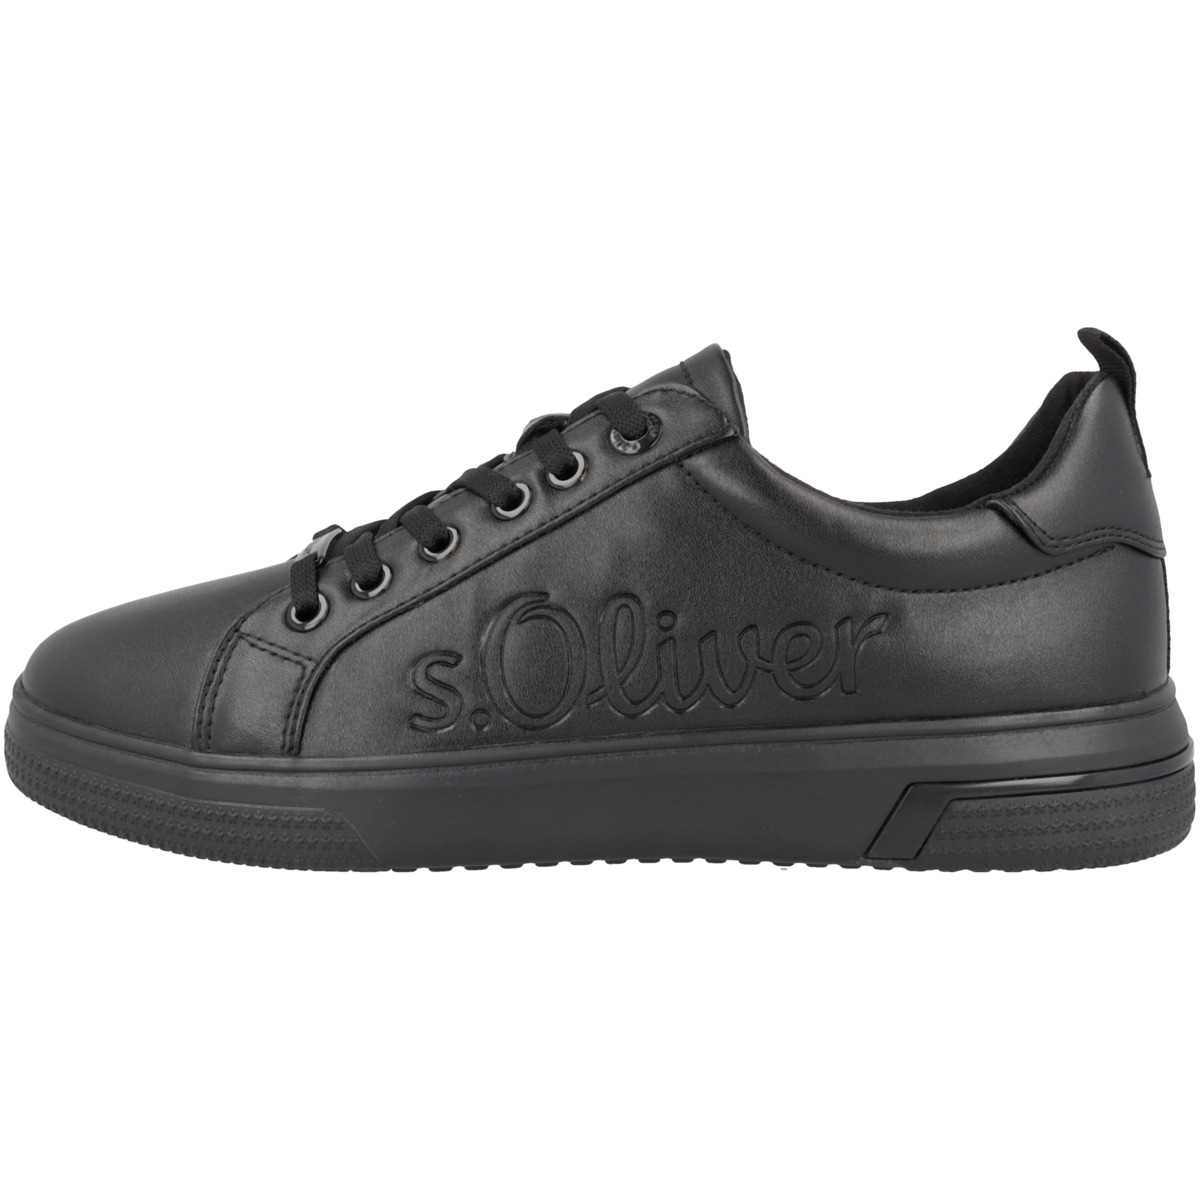 s.Oliver 5-23601-39 Sneaker low